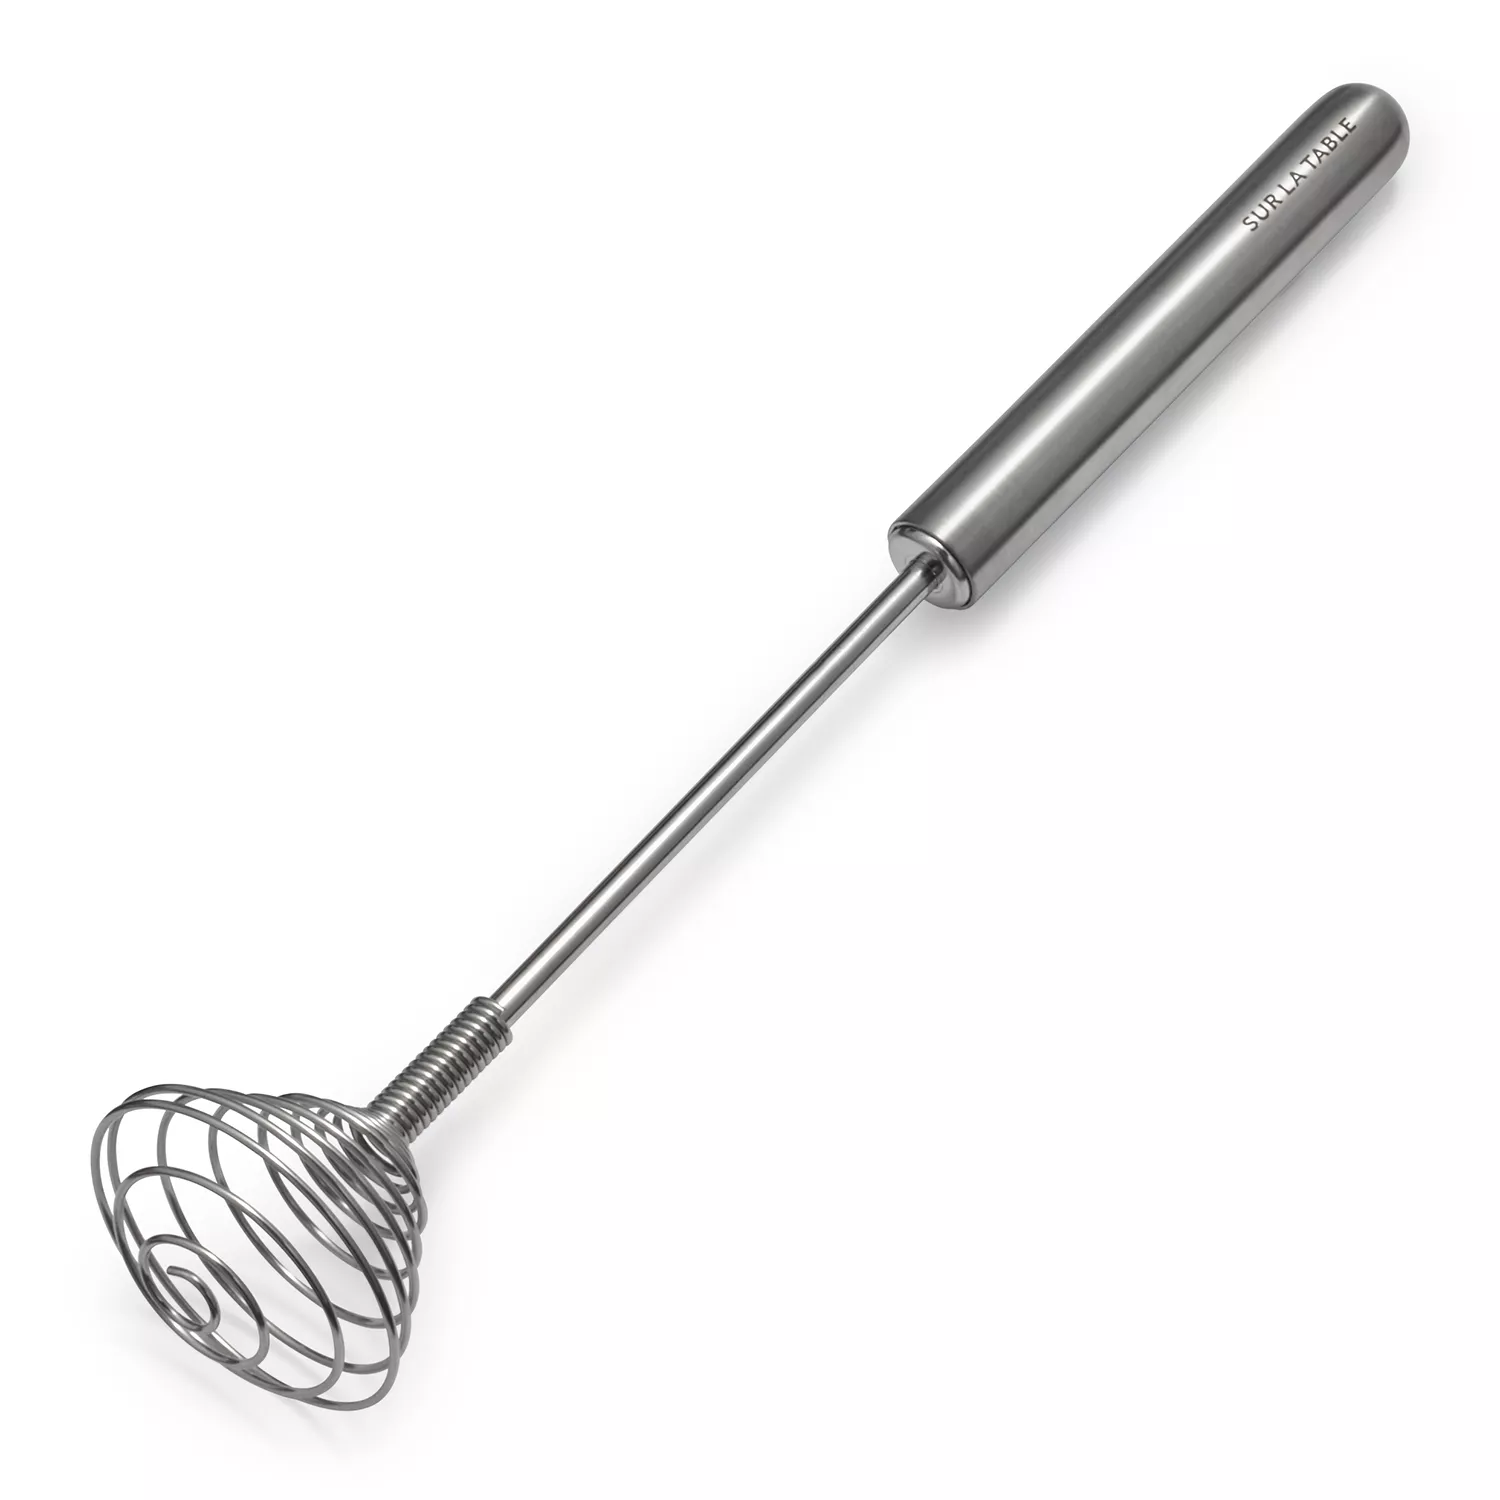 Sur La Table Stainless Steel Ball Whisk, Silver